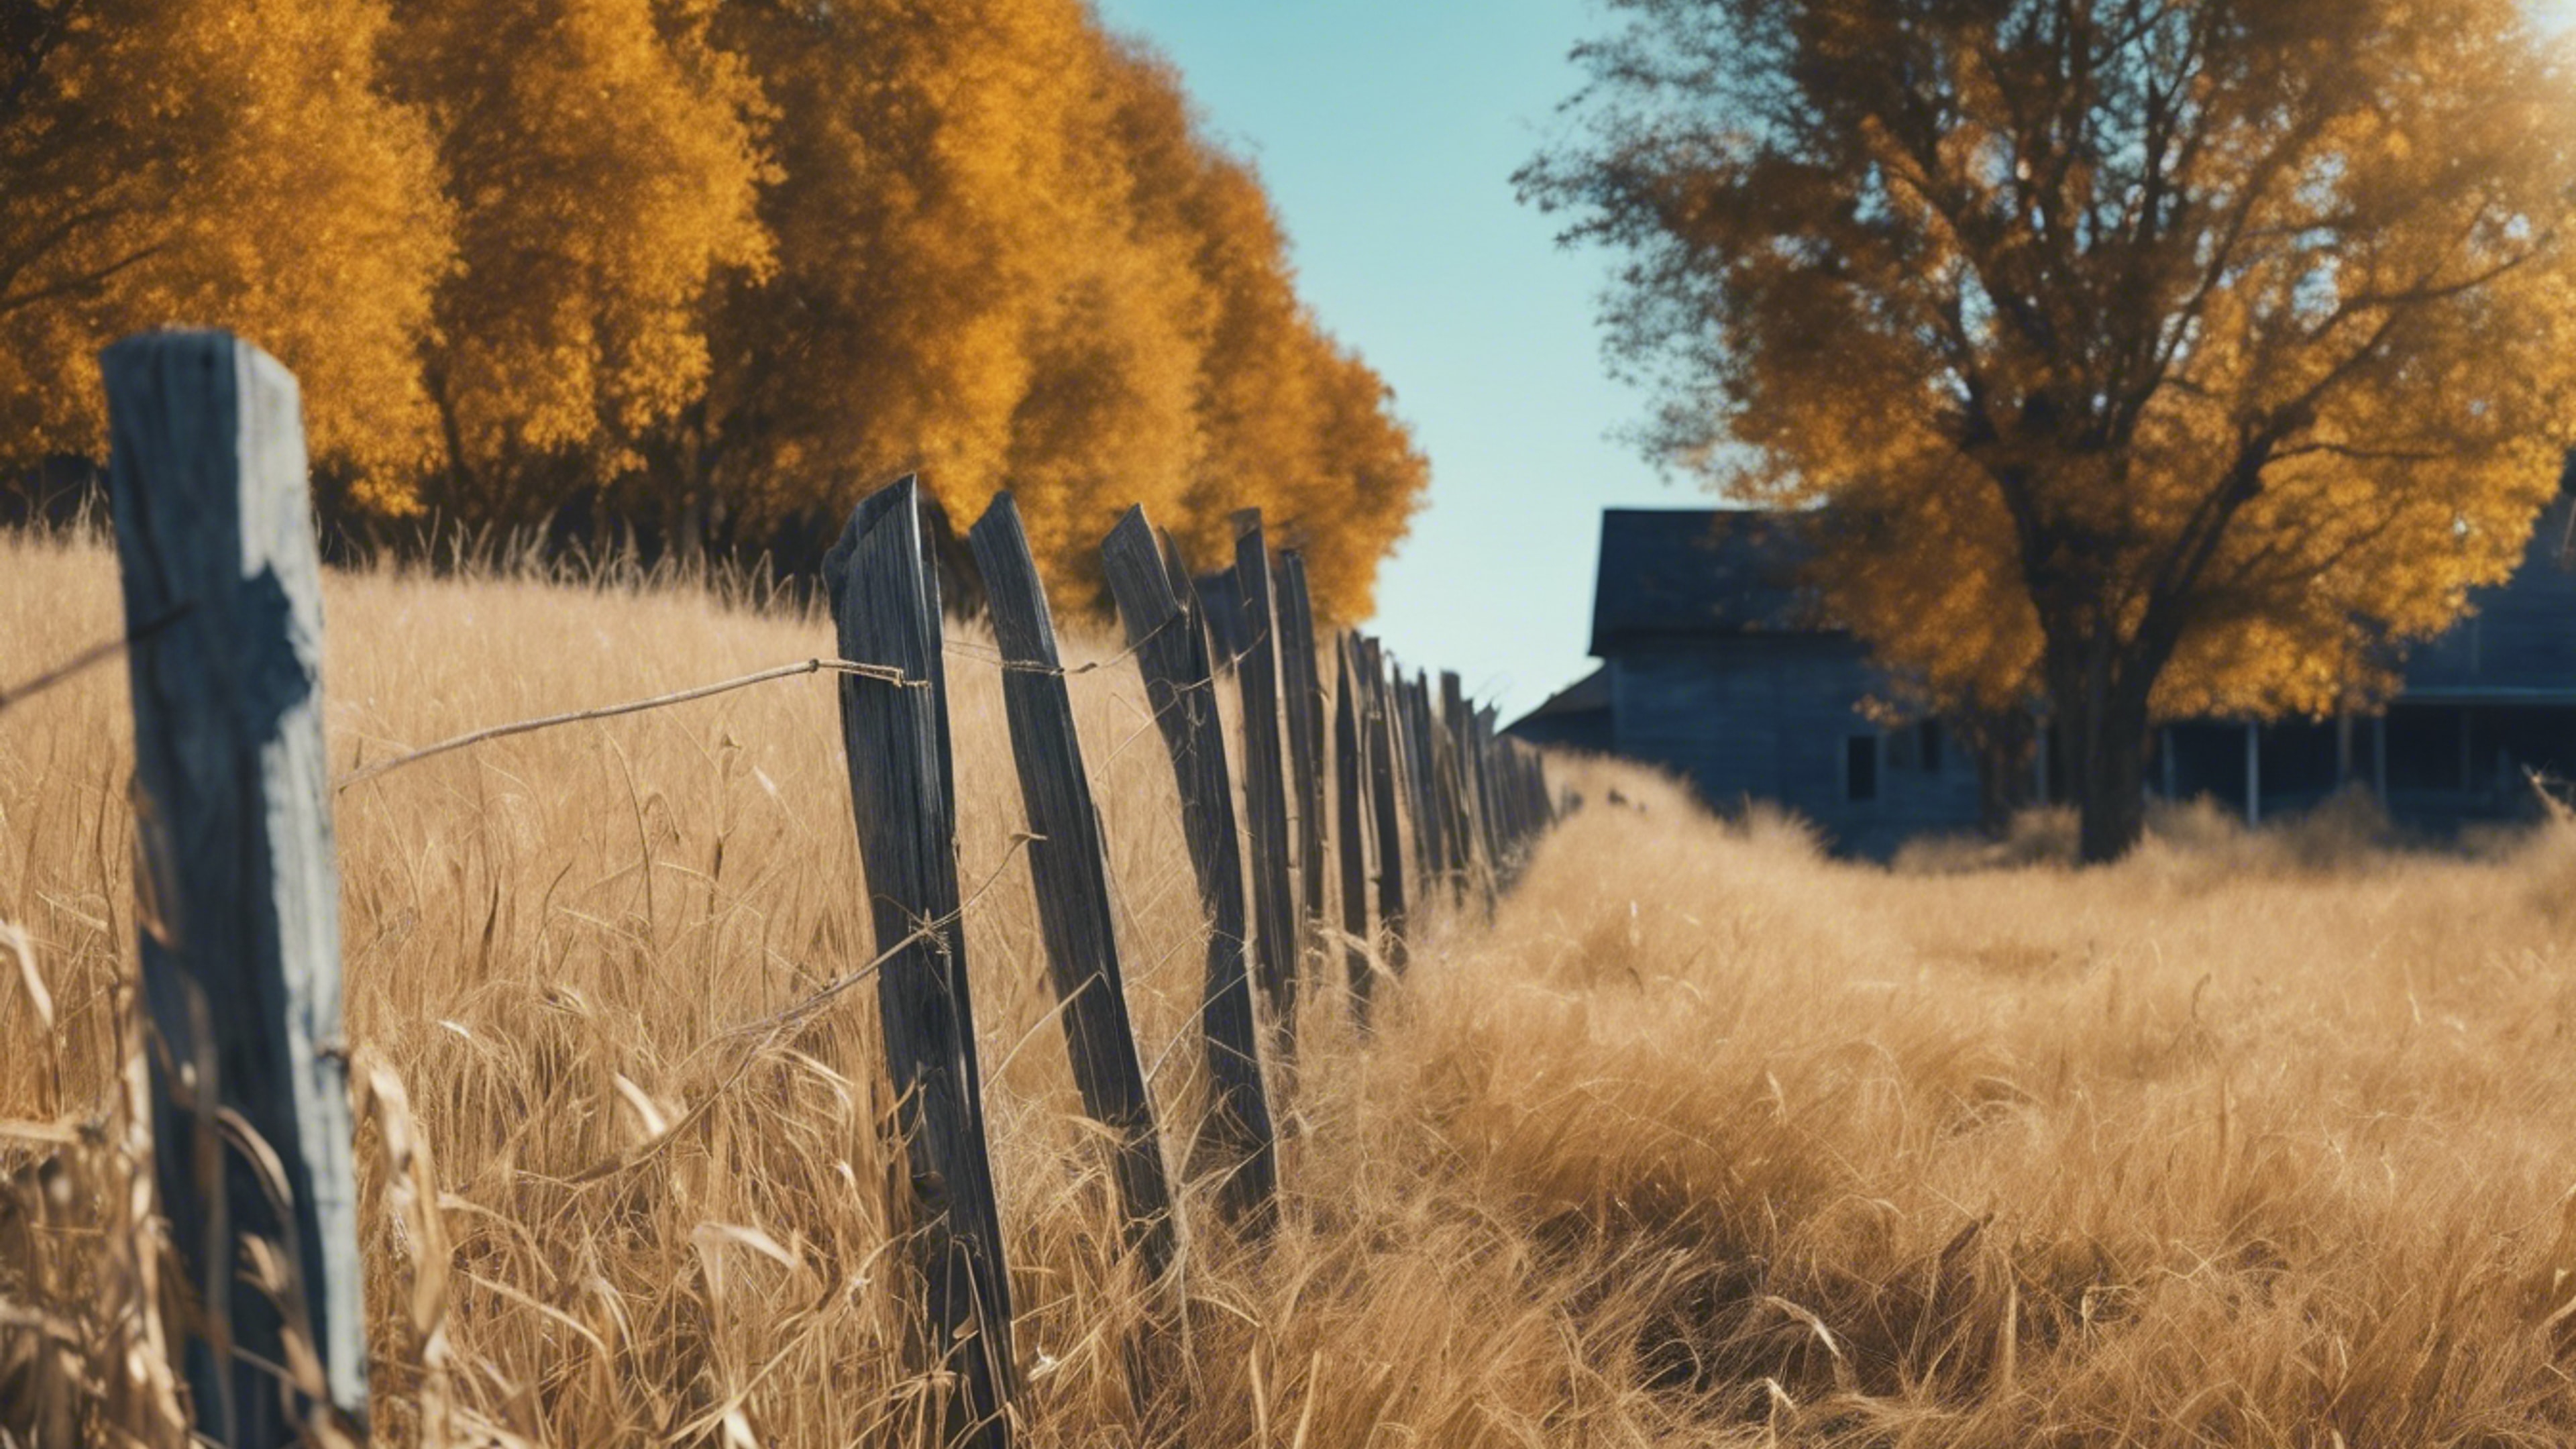 A weathered picket fence bordering a rustling cornfield, under the cool, crisp blue sky of a mid-autumn day.壁紙[baa0a360155c4d87a481]